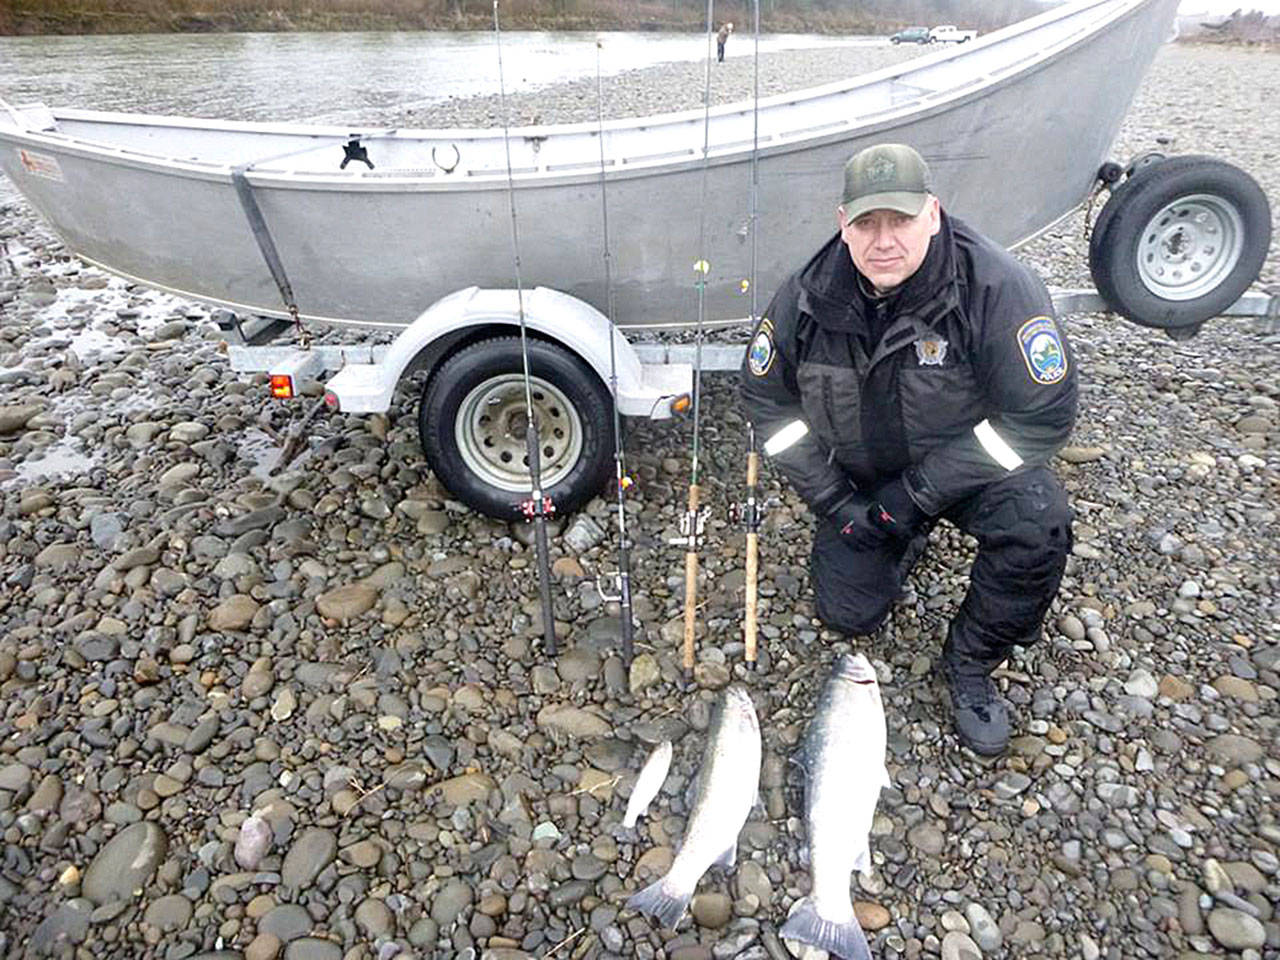 Washington Department of Fish and Wildlife Police Officer Bryan Davidson displays two wild steelhead and an undersized cutthroat trout along with the rods used to poach the fish after a January incident on the Quillayute River near Forks. (Washington Department of Fish and Wildlife Police)